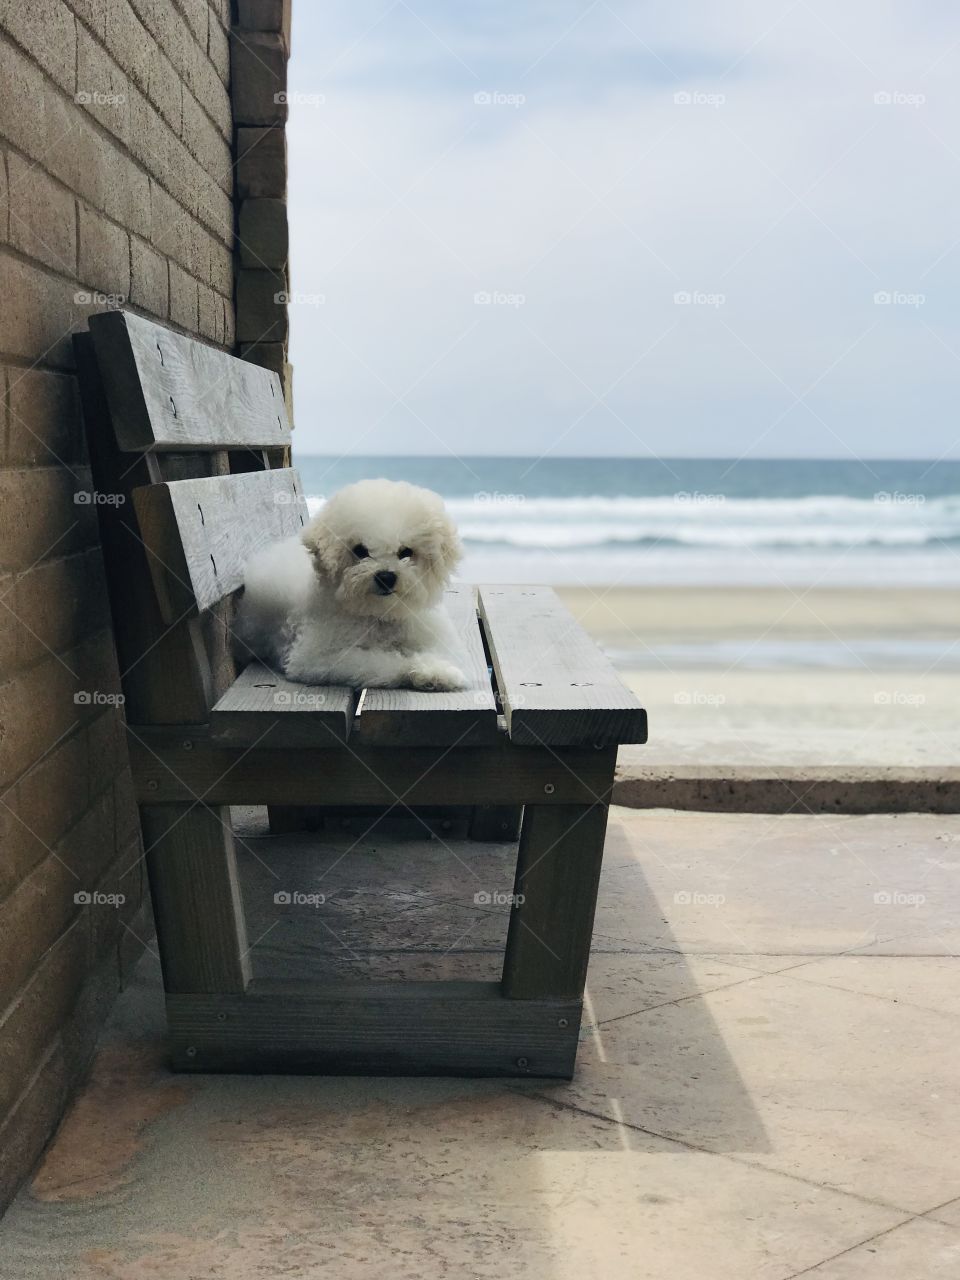 A young puppy is lying on a wooden bench beside a brick wall at the seashore. 